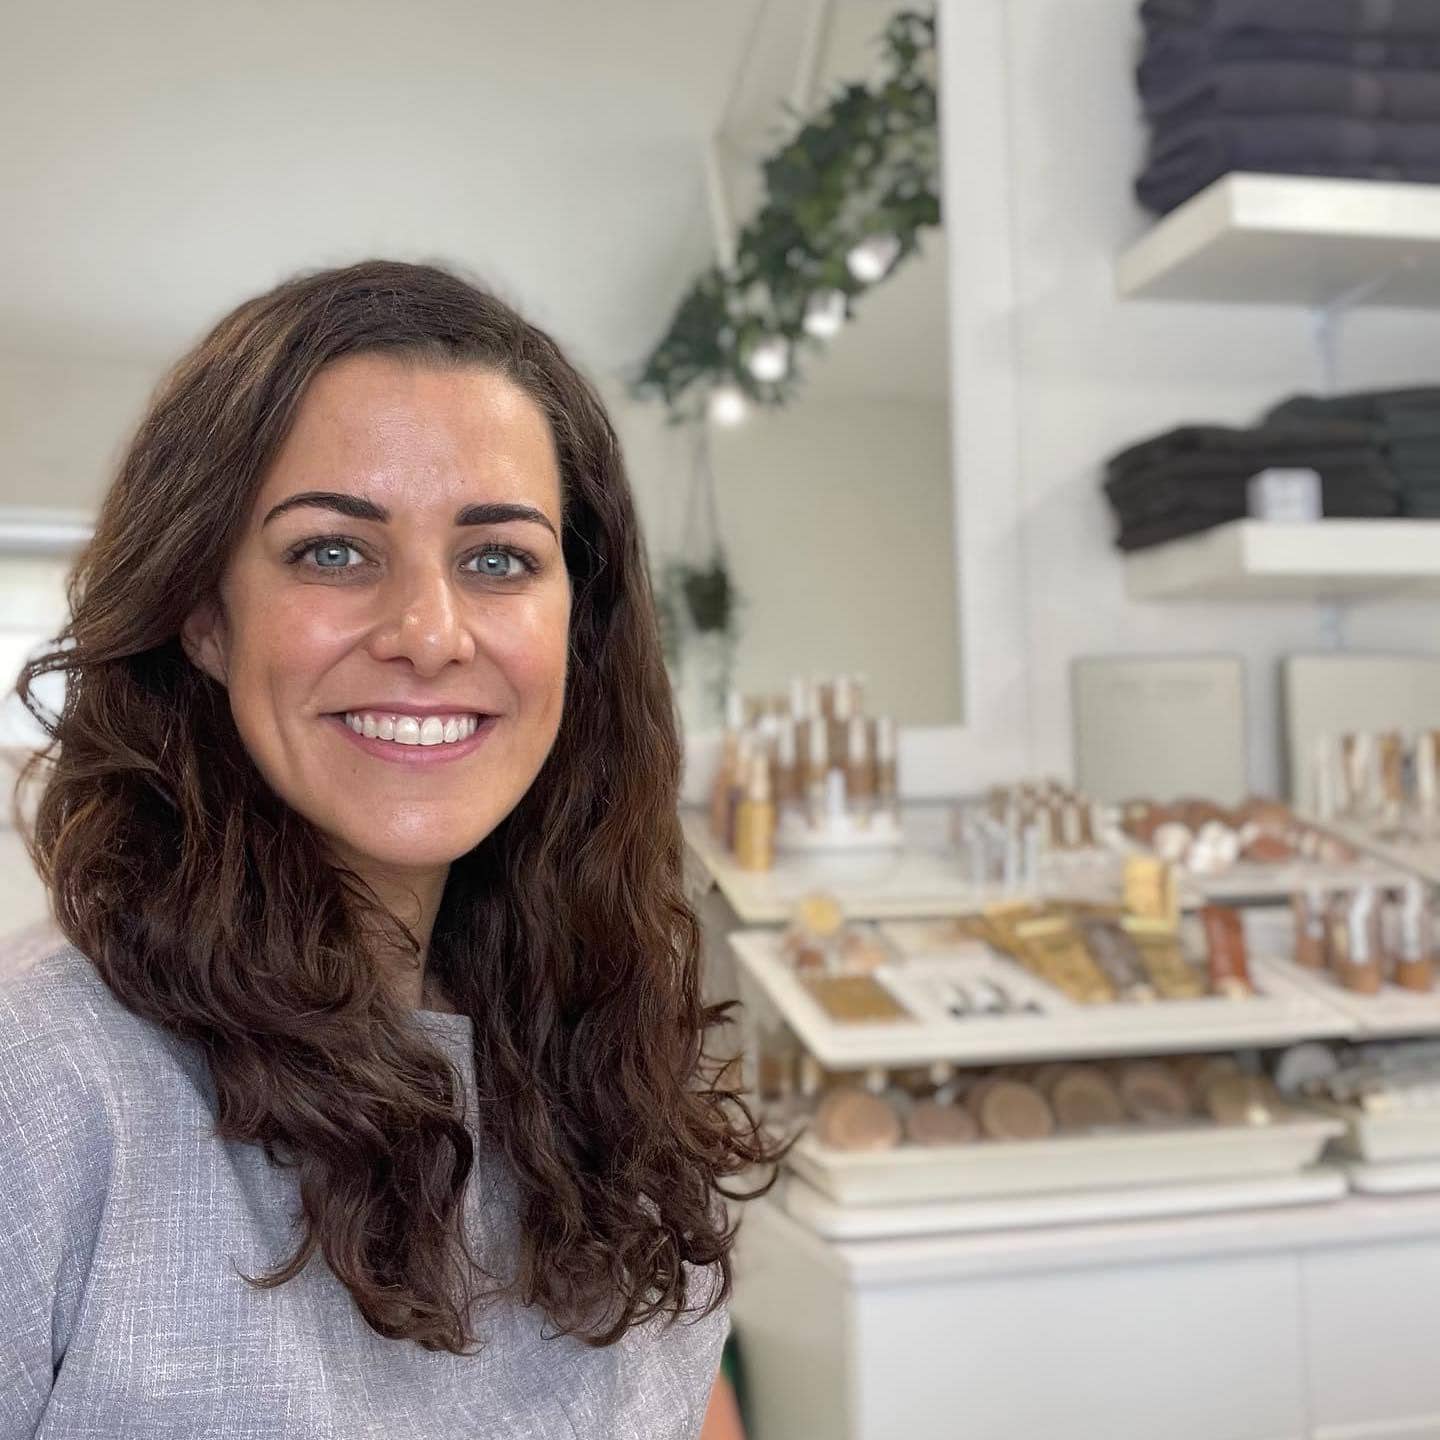 the image is of Zoe Greenwood who is the owner and skincare specialist at Alchemy Clinic